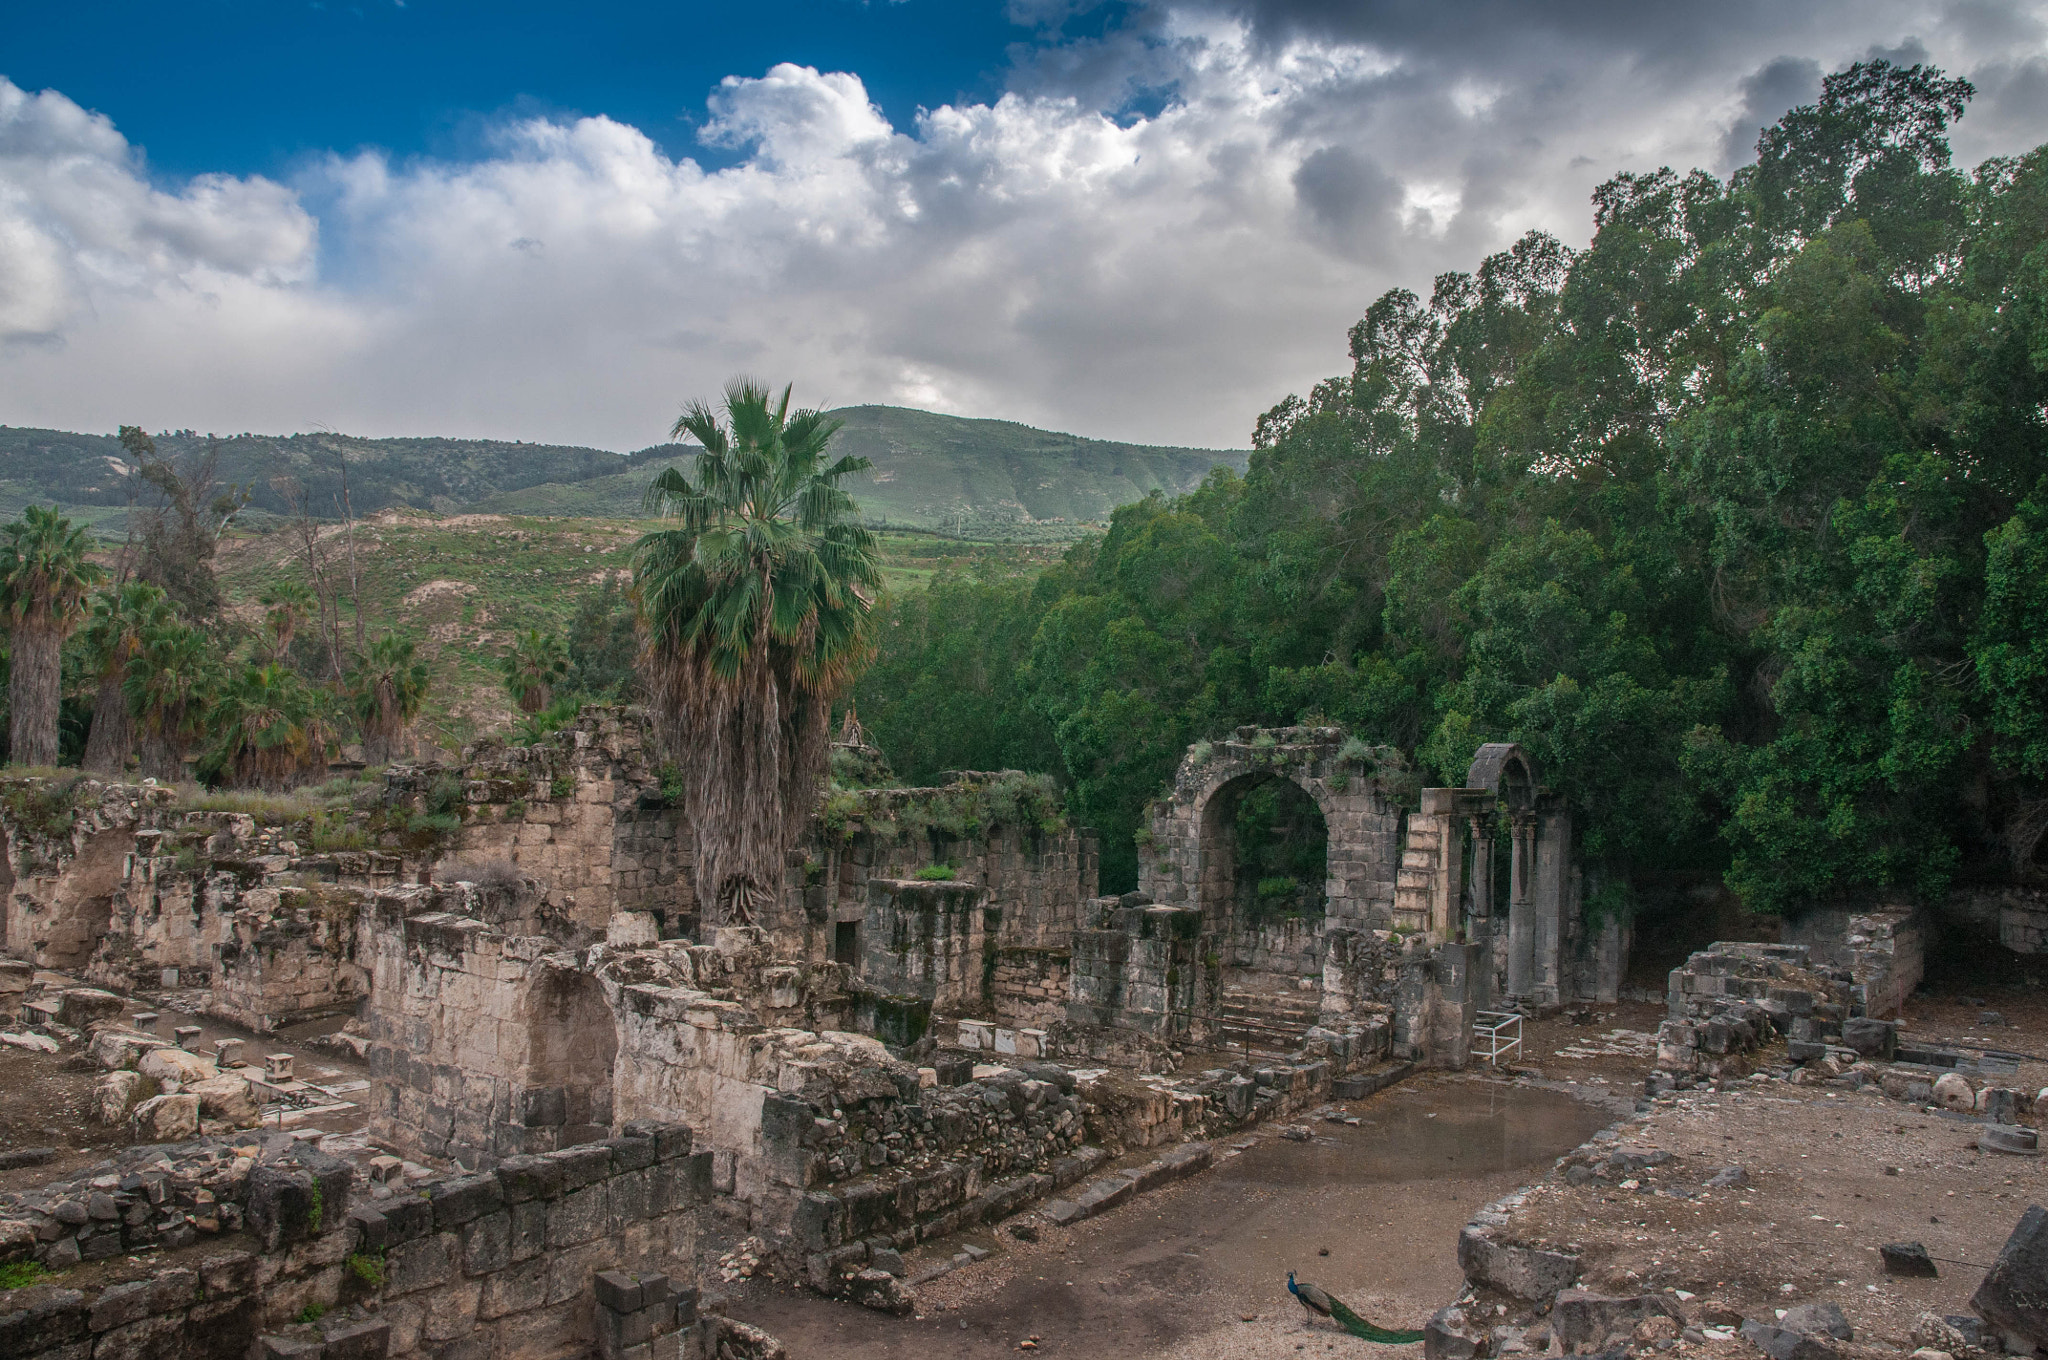 Nikon D90 + Sigma 17-70mm F2.8-4 DC Macro OS HSM | C sample photo. The ruins of the ancient city of gadara in the nor photography